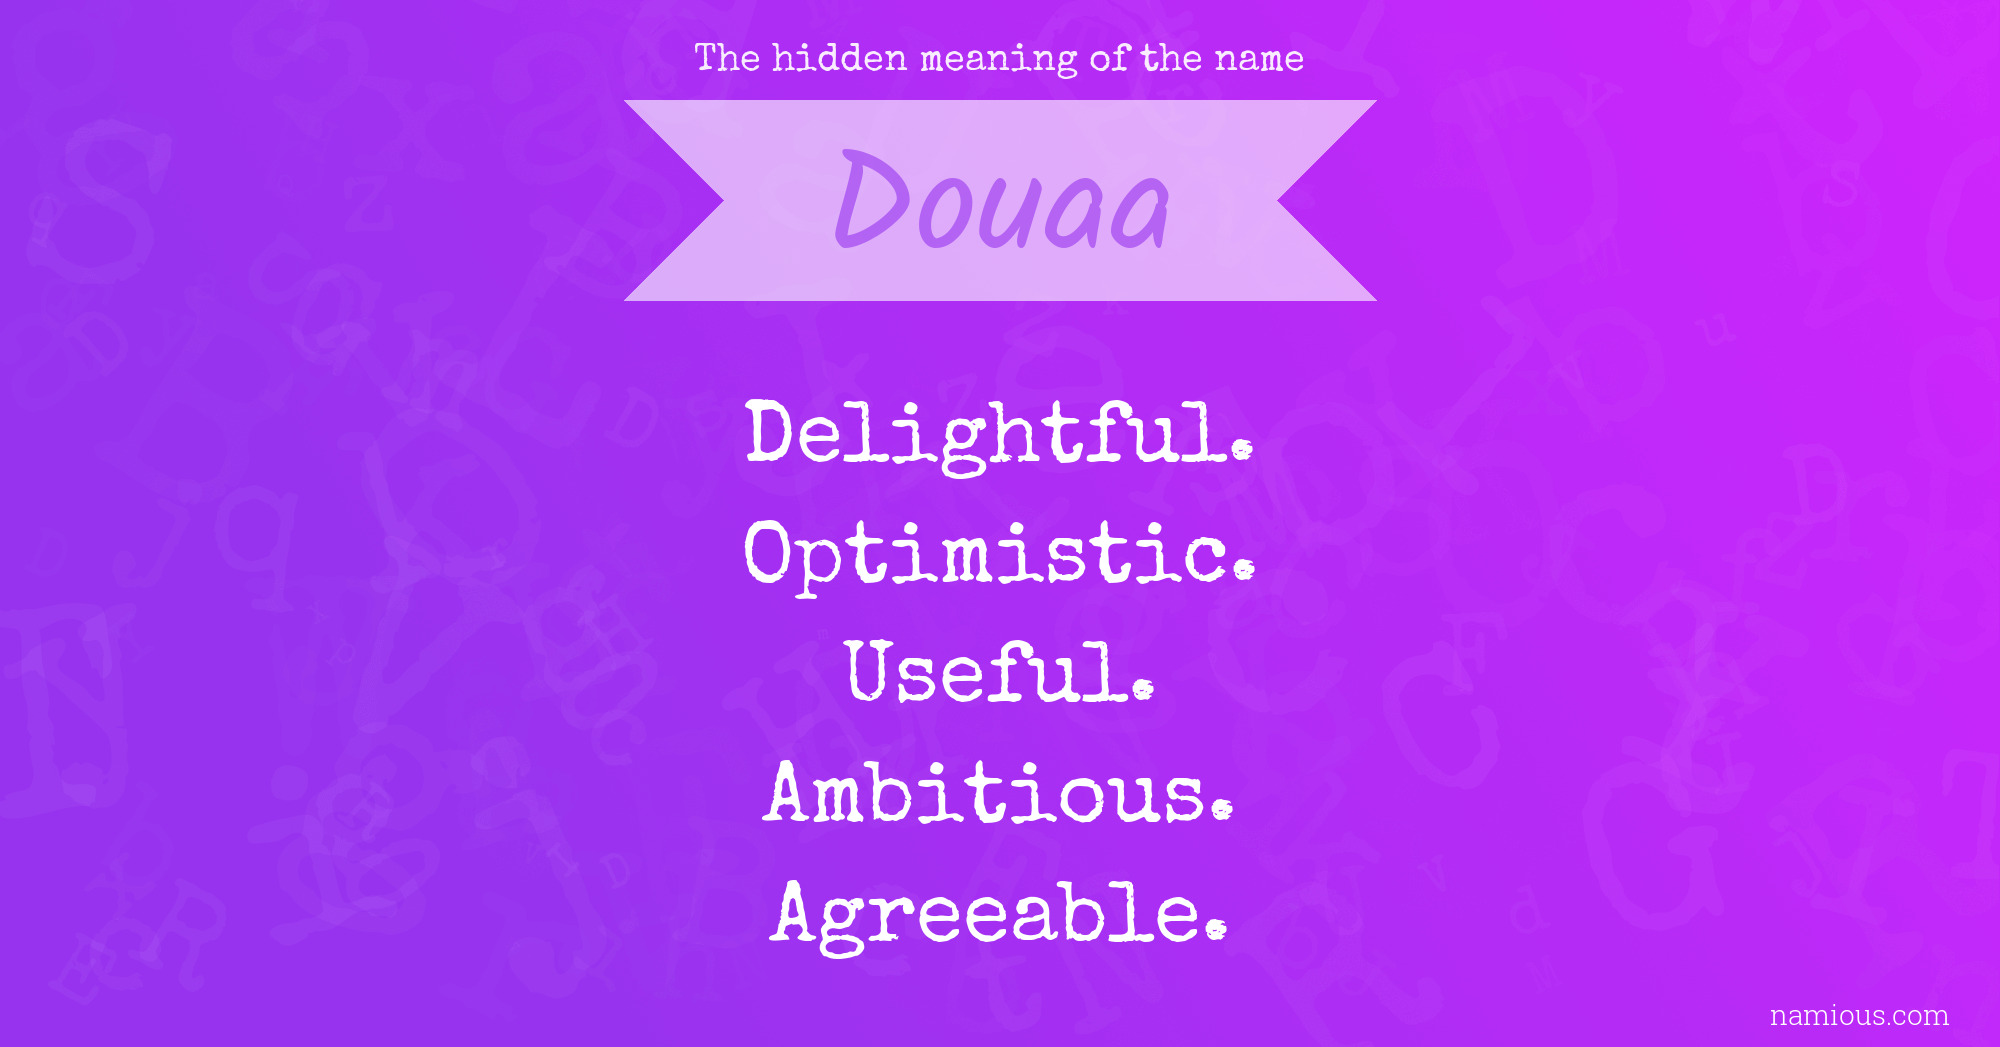 The hidden meaning of the name Douaa